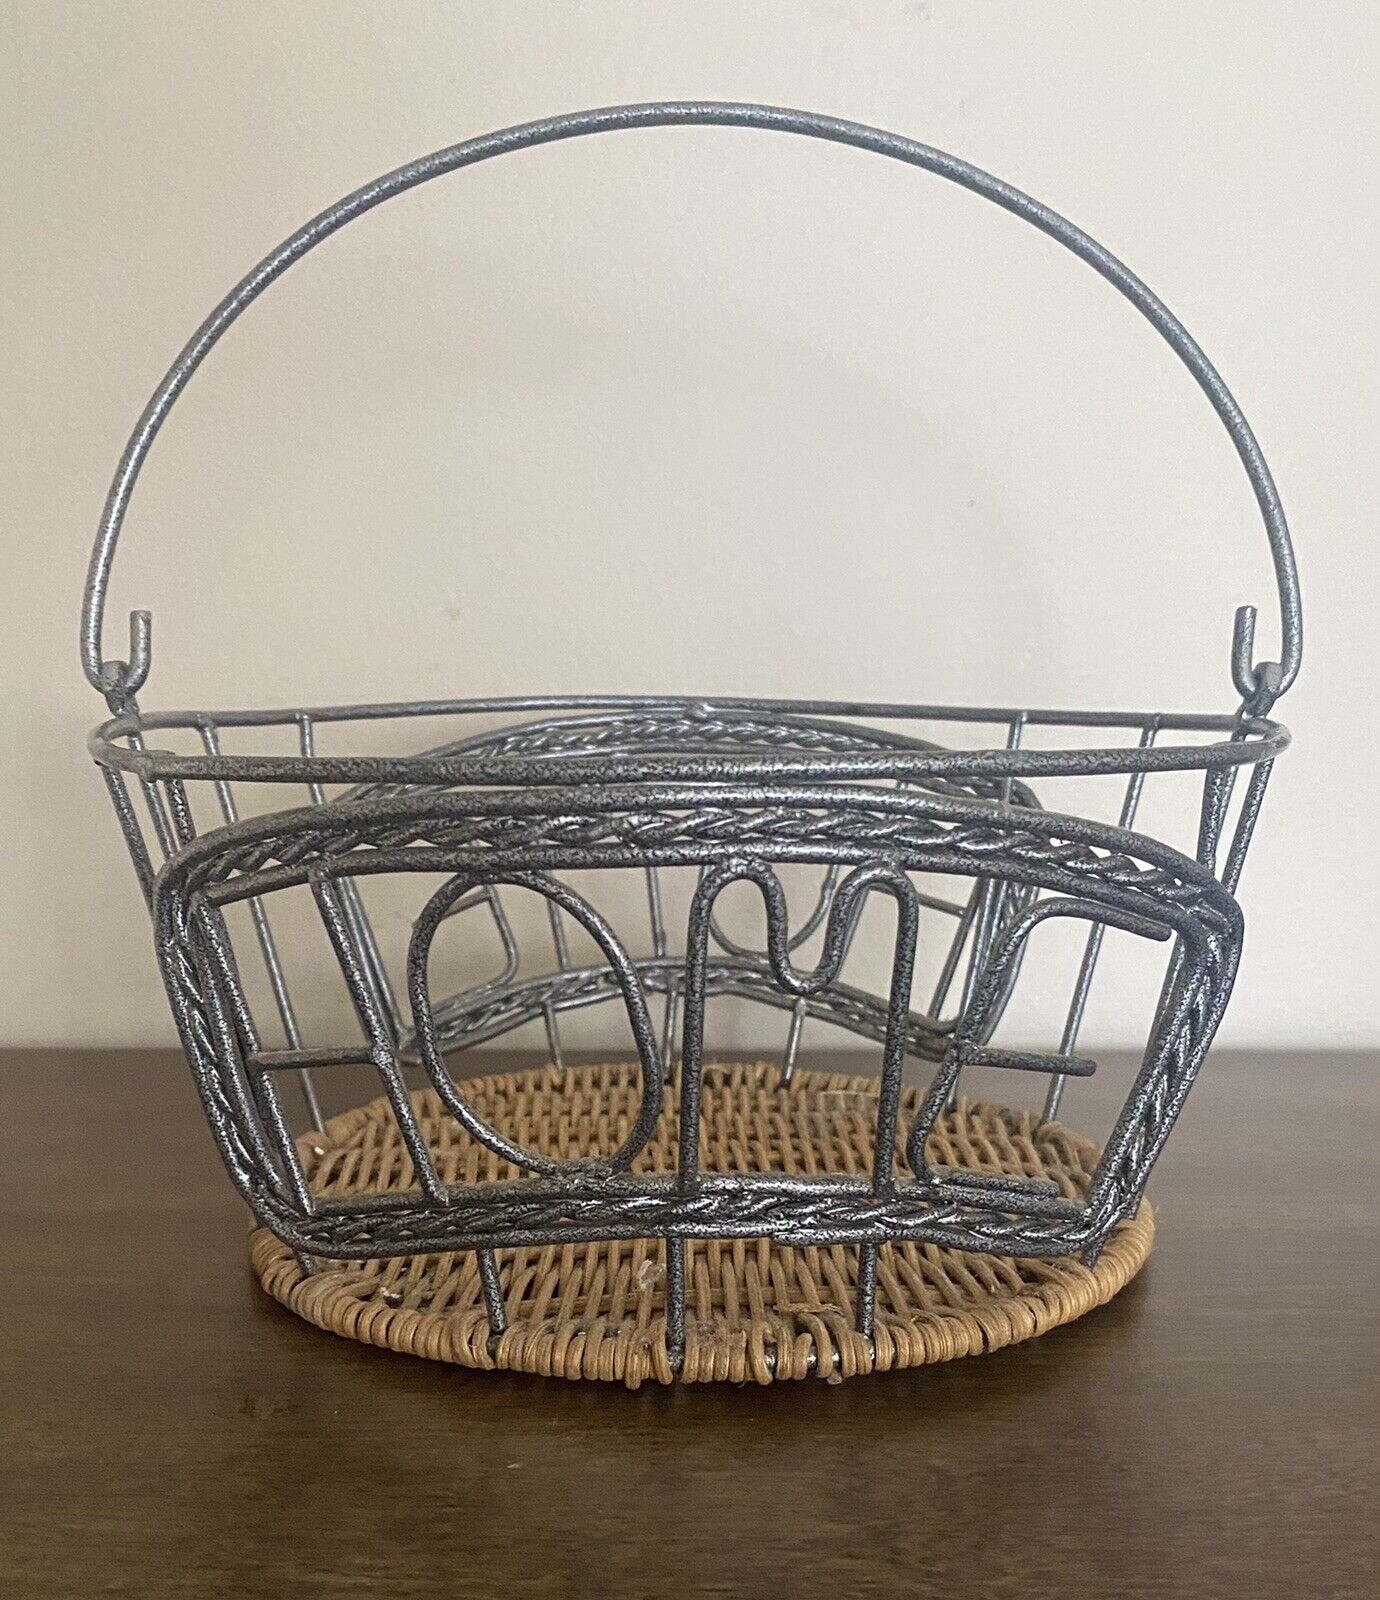 Farmhouse Country Rustic Wire Metal “Home” Silver Basket Weaved Bottom